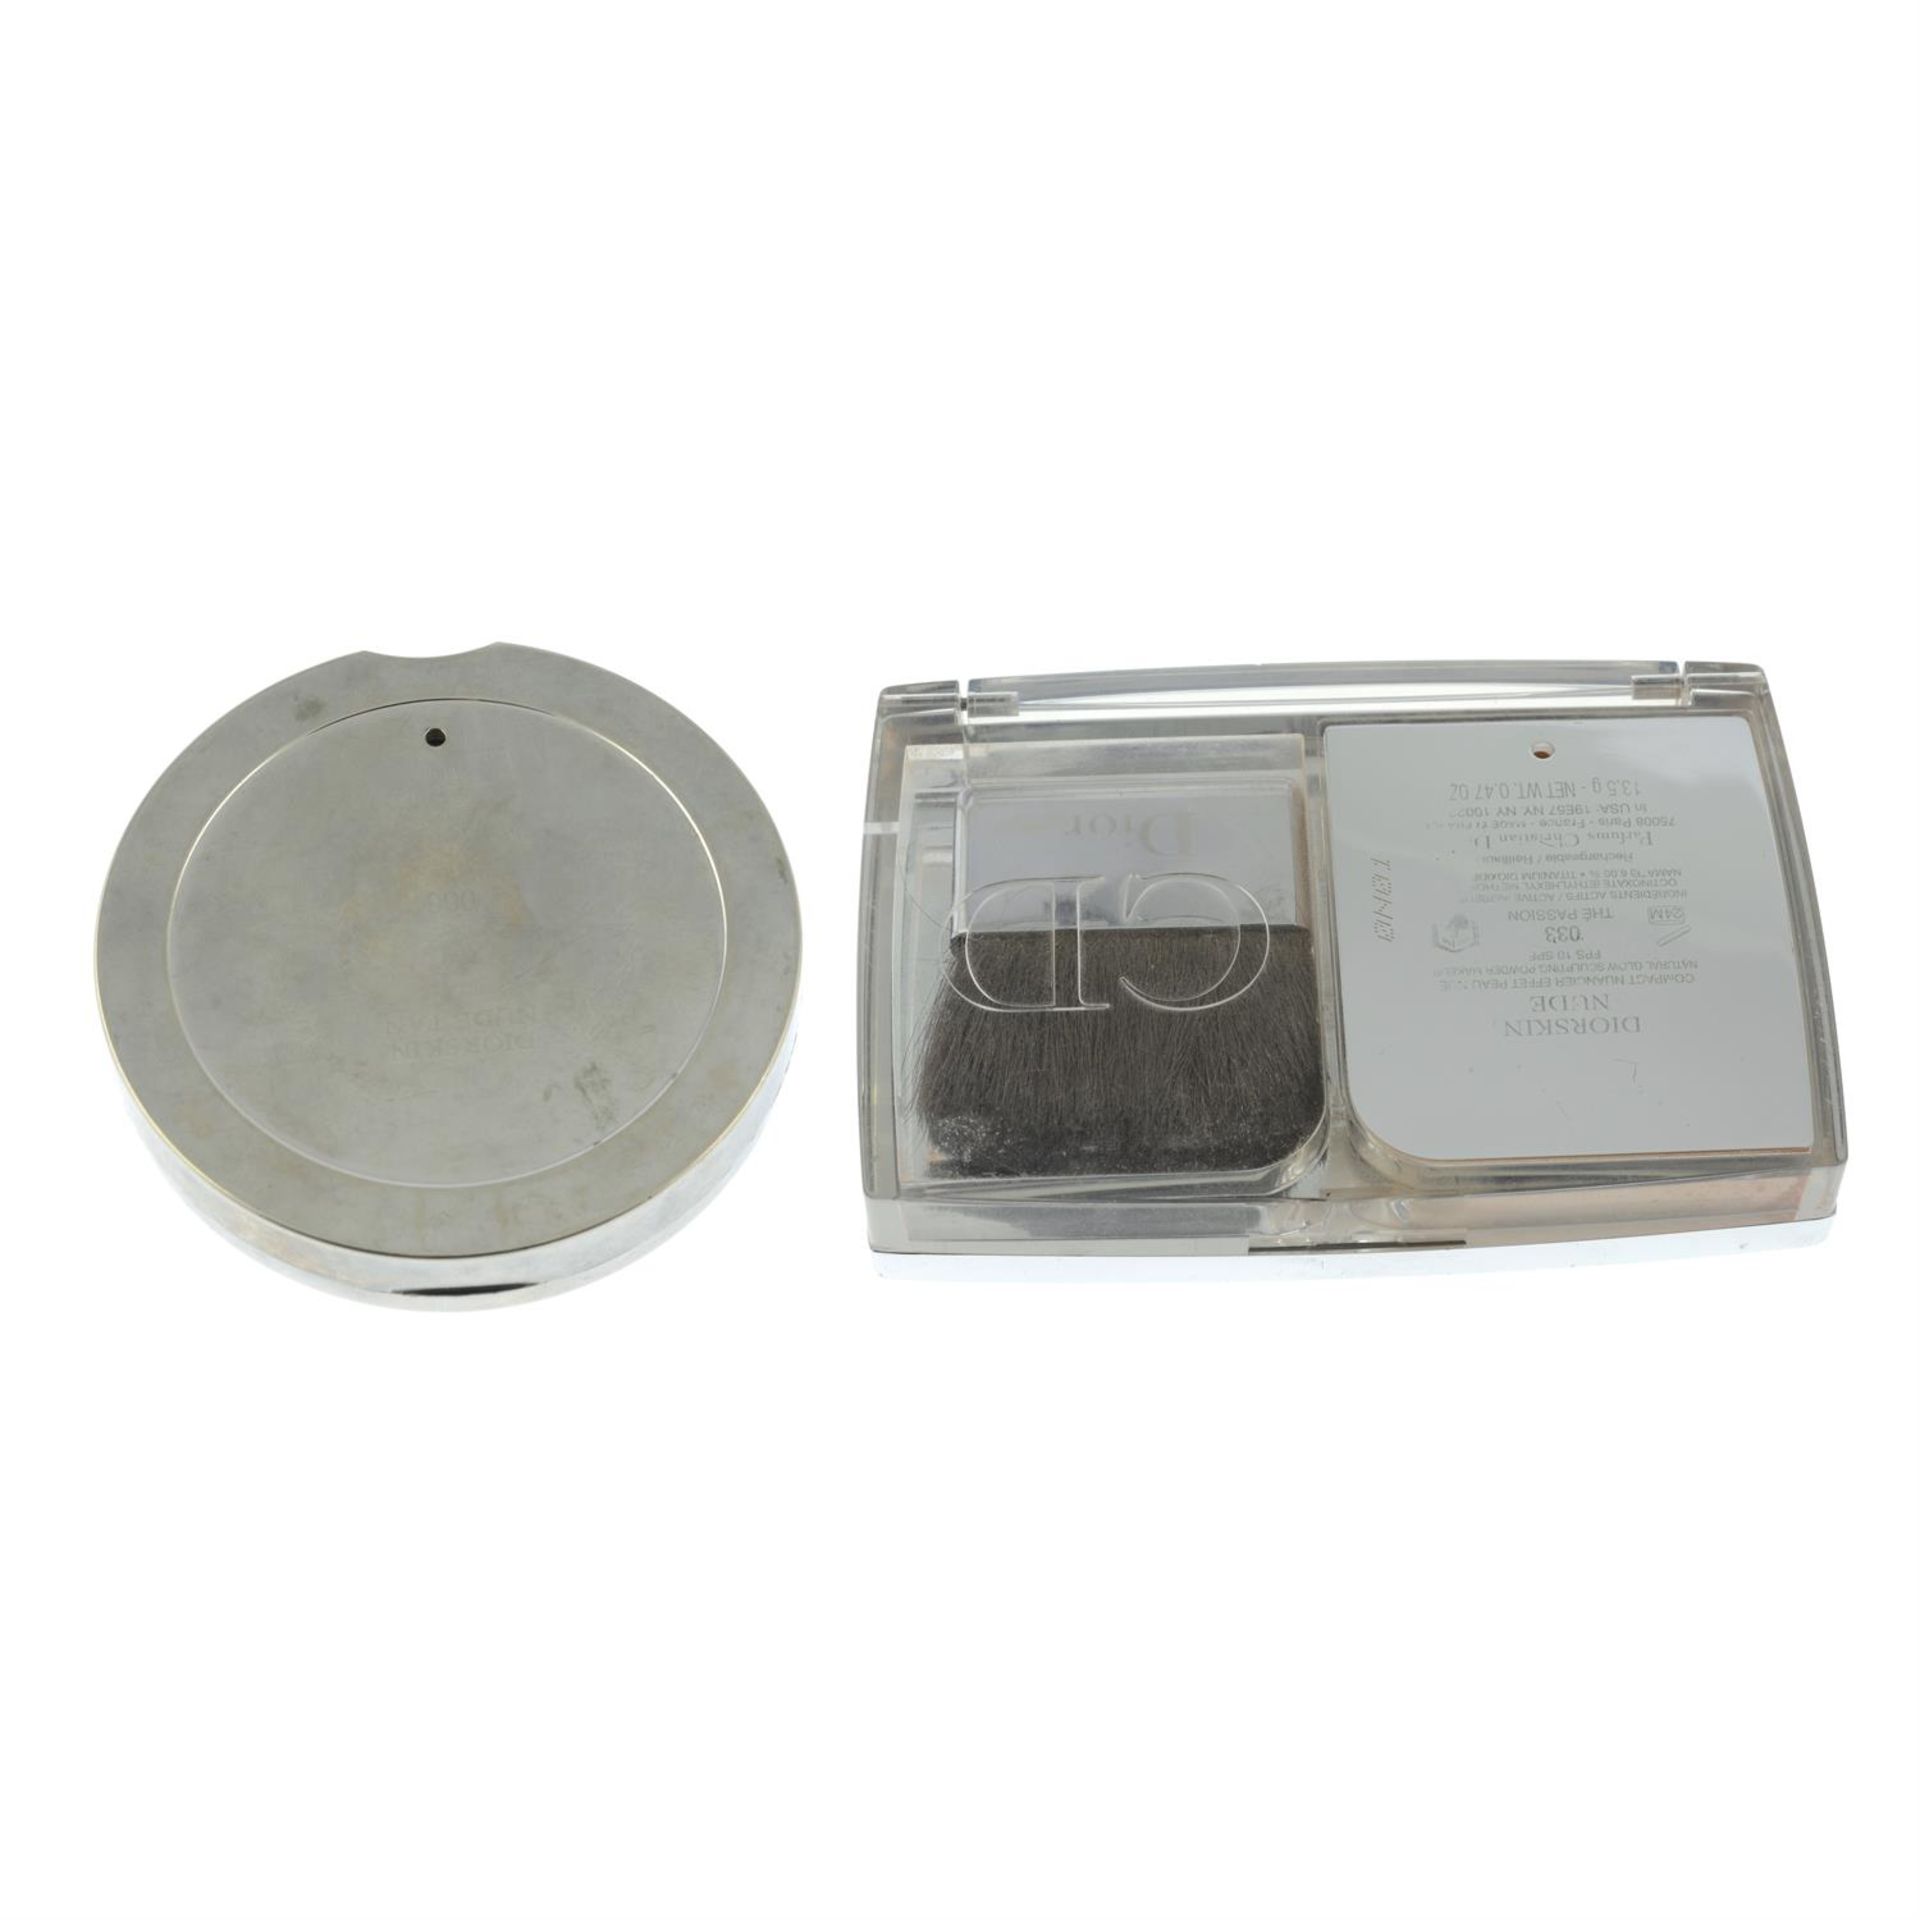 CHRISTIAN DIOR - two powder and mirror compacts. - Image 2 of 3